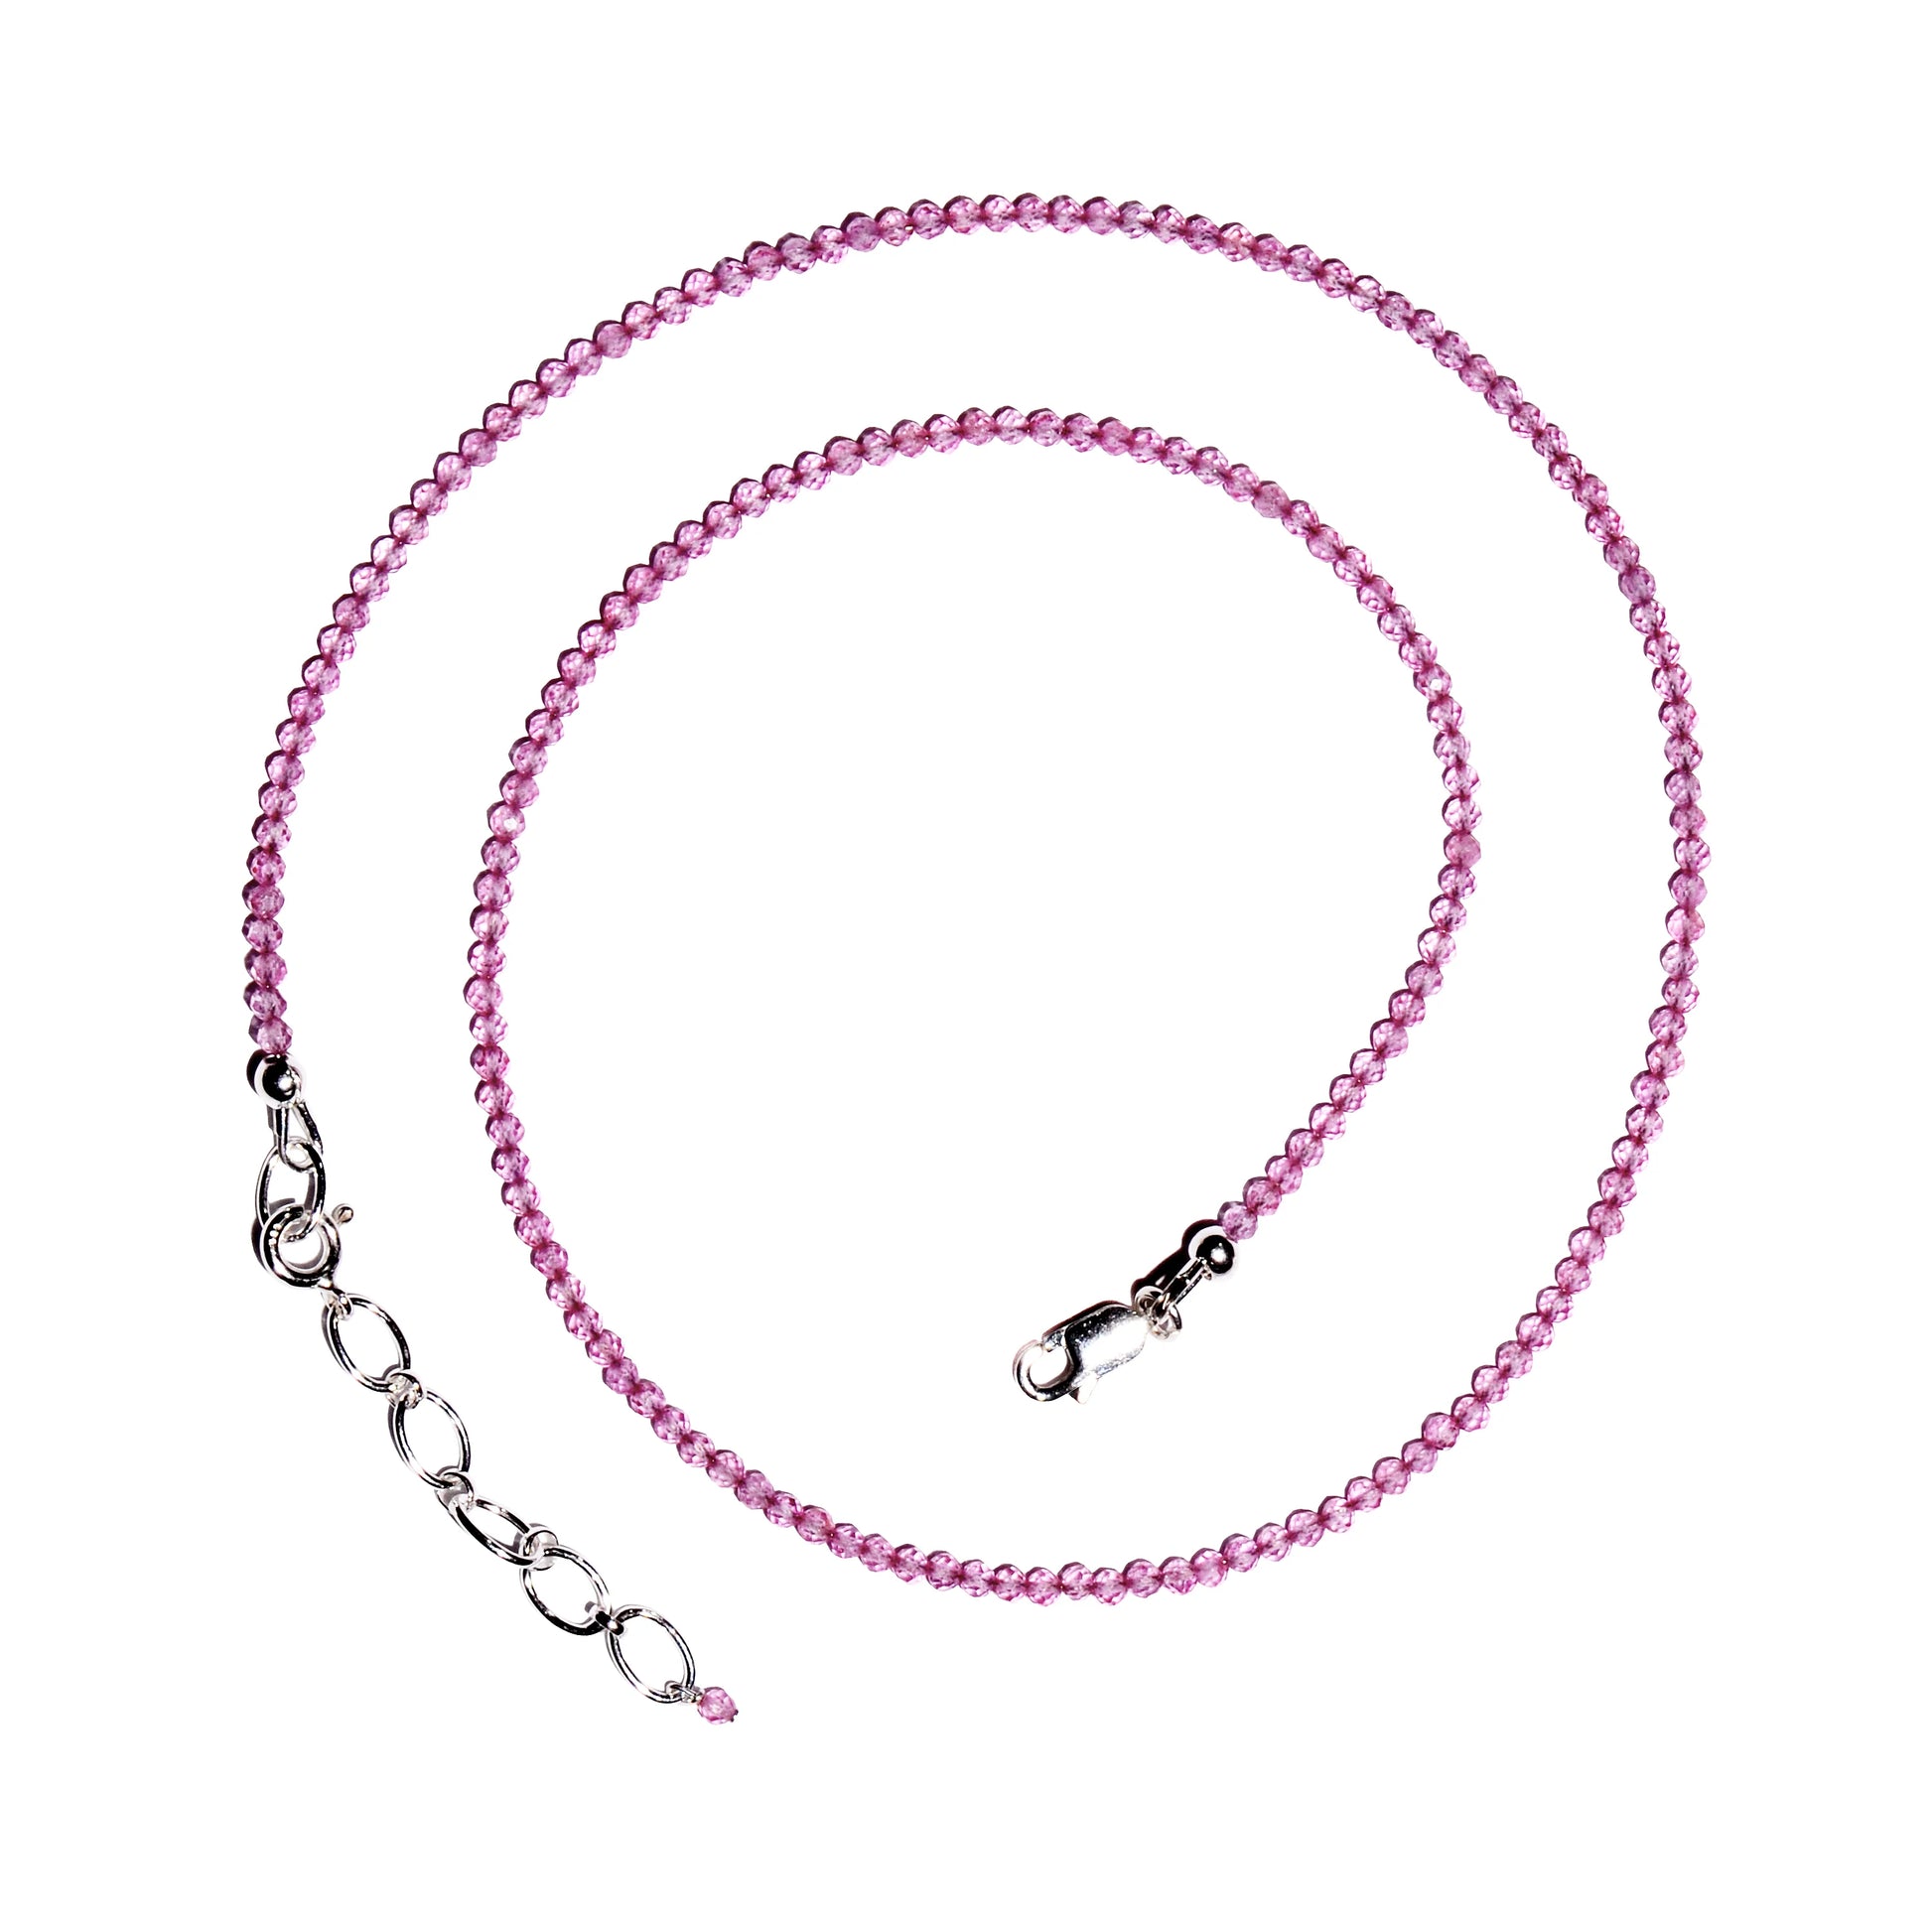 Buy Pink Topaz Faceted Microbead Necklace 2.5mm for emotional healing and harmony